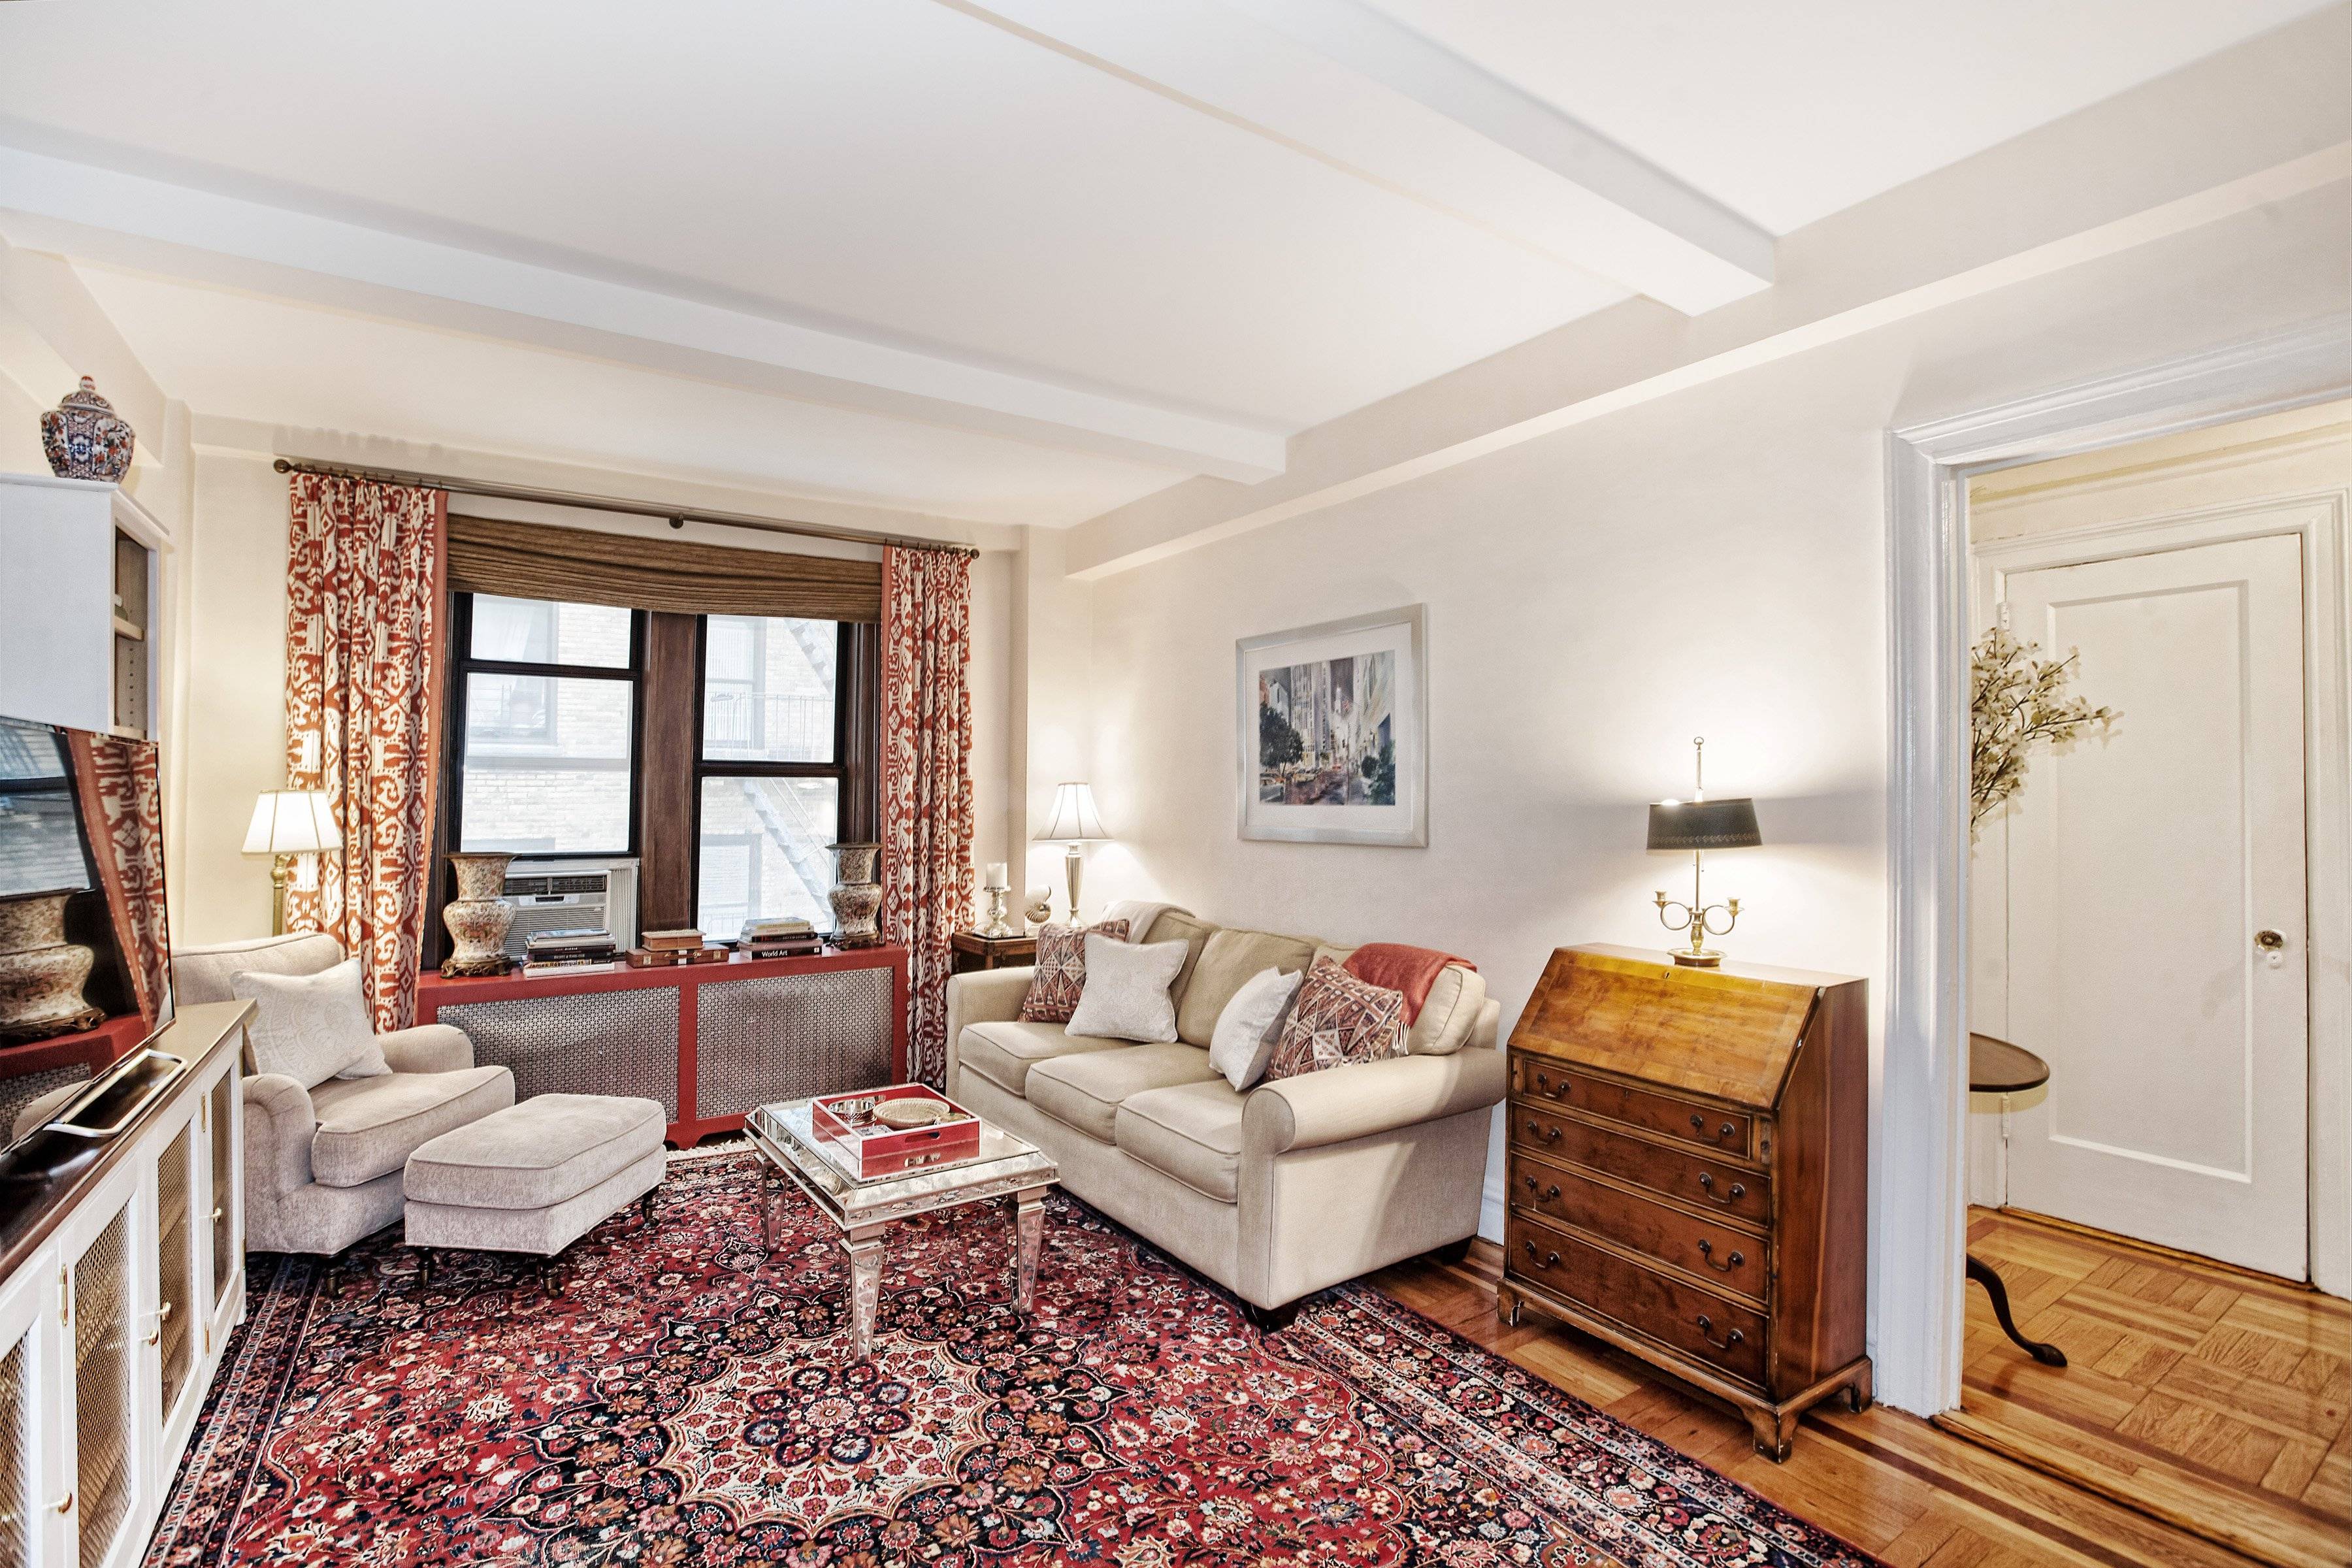 Presenting a lovely, fully renovated prewar one bedroom in prime Carnegie Hill off Park Avenue.